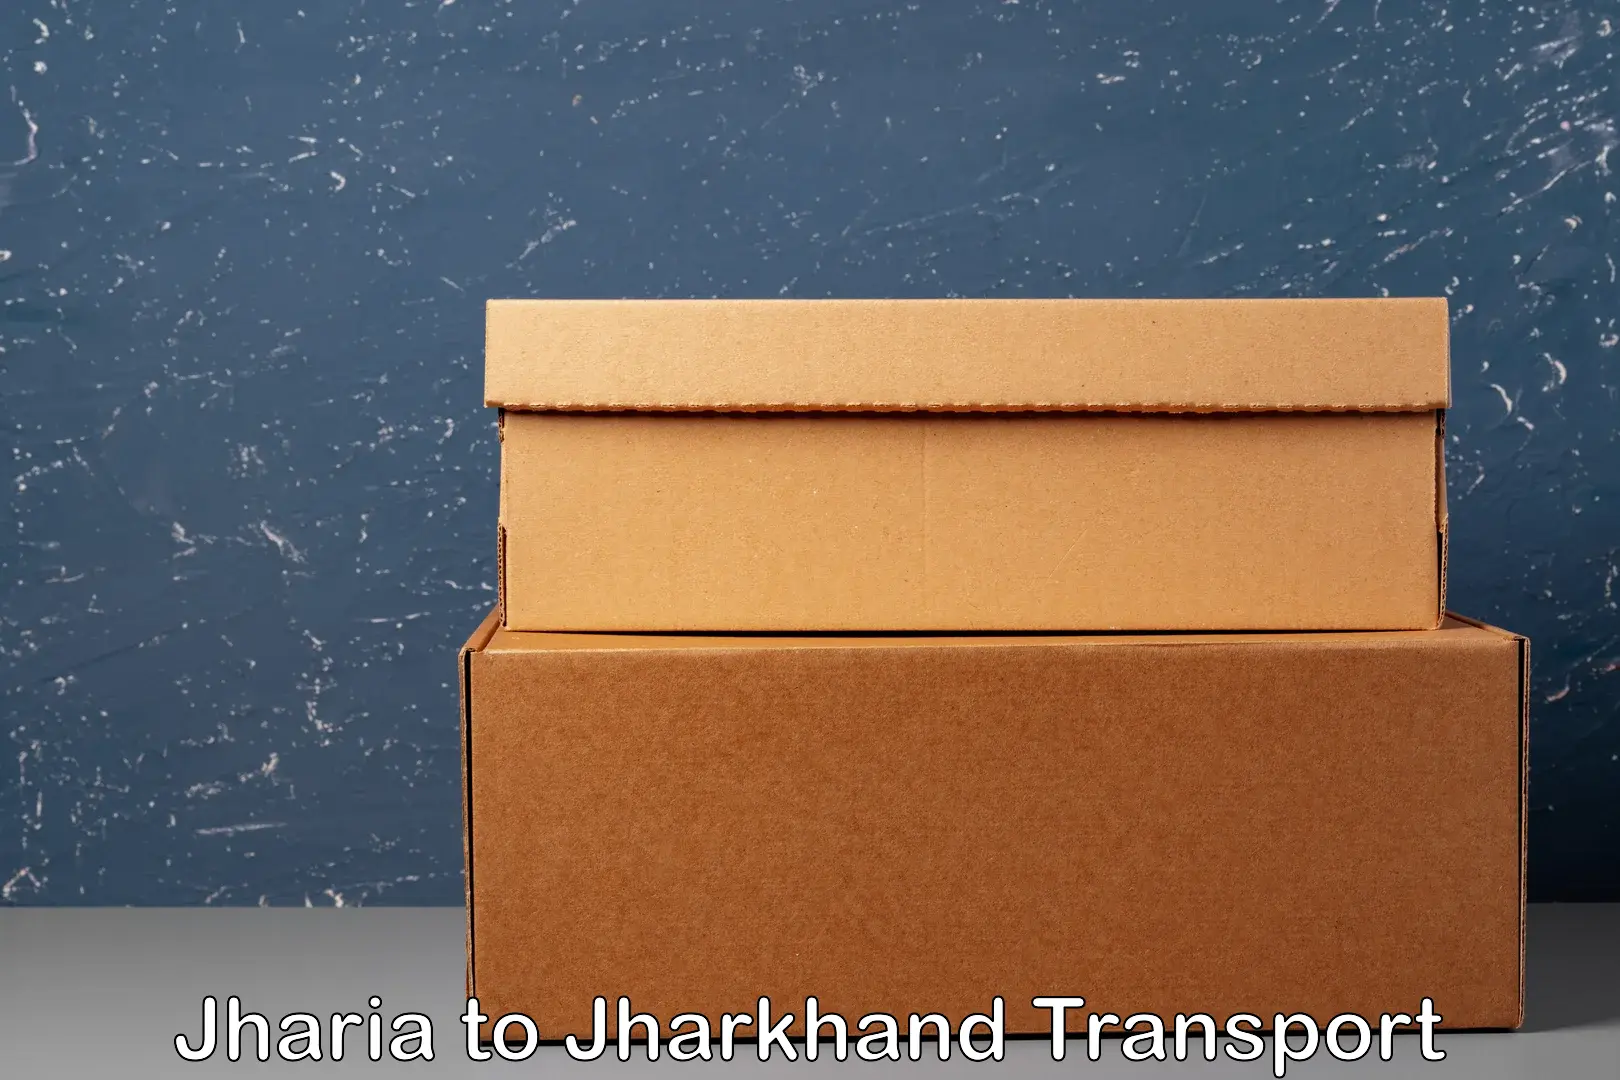 Truck transport companies in India Jharia to Jharia